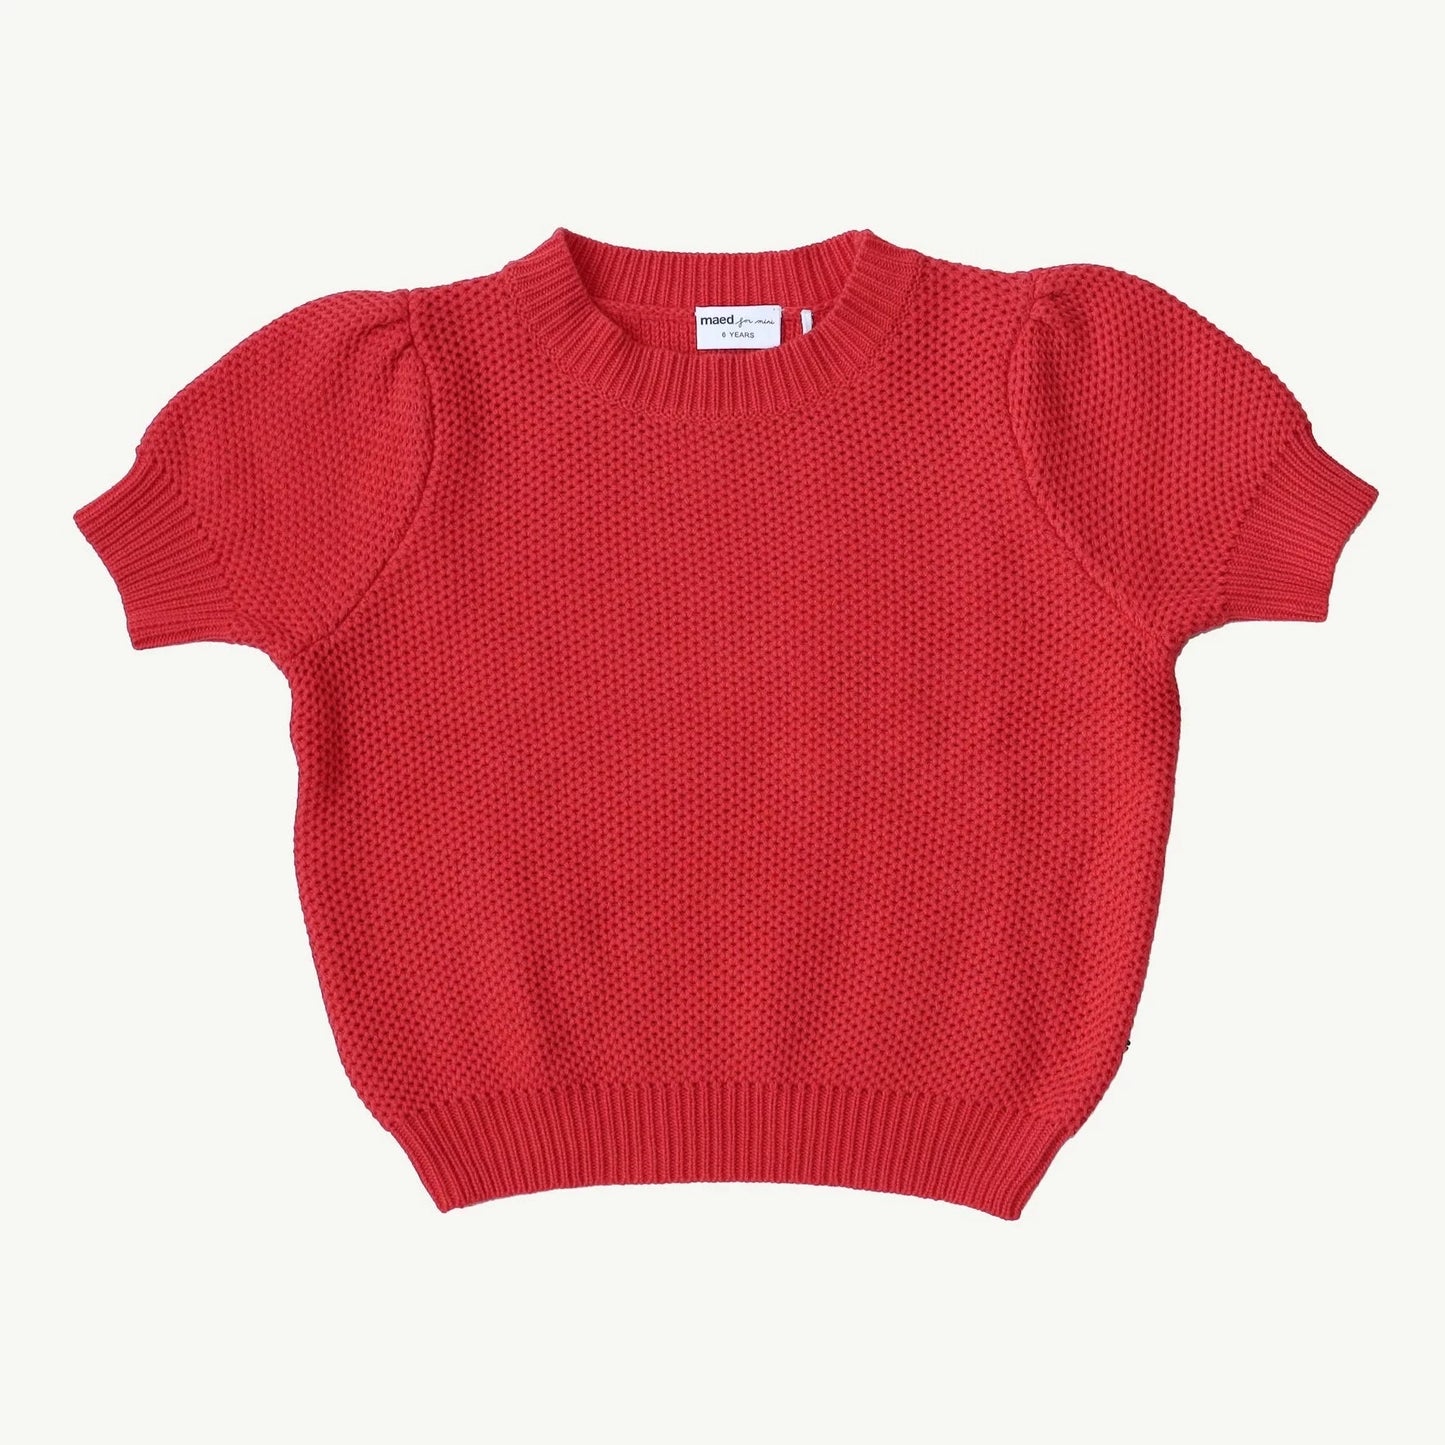 Girls Knitted Jumper - Sweet Scorpion Red